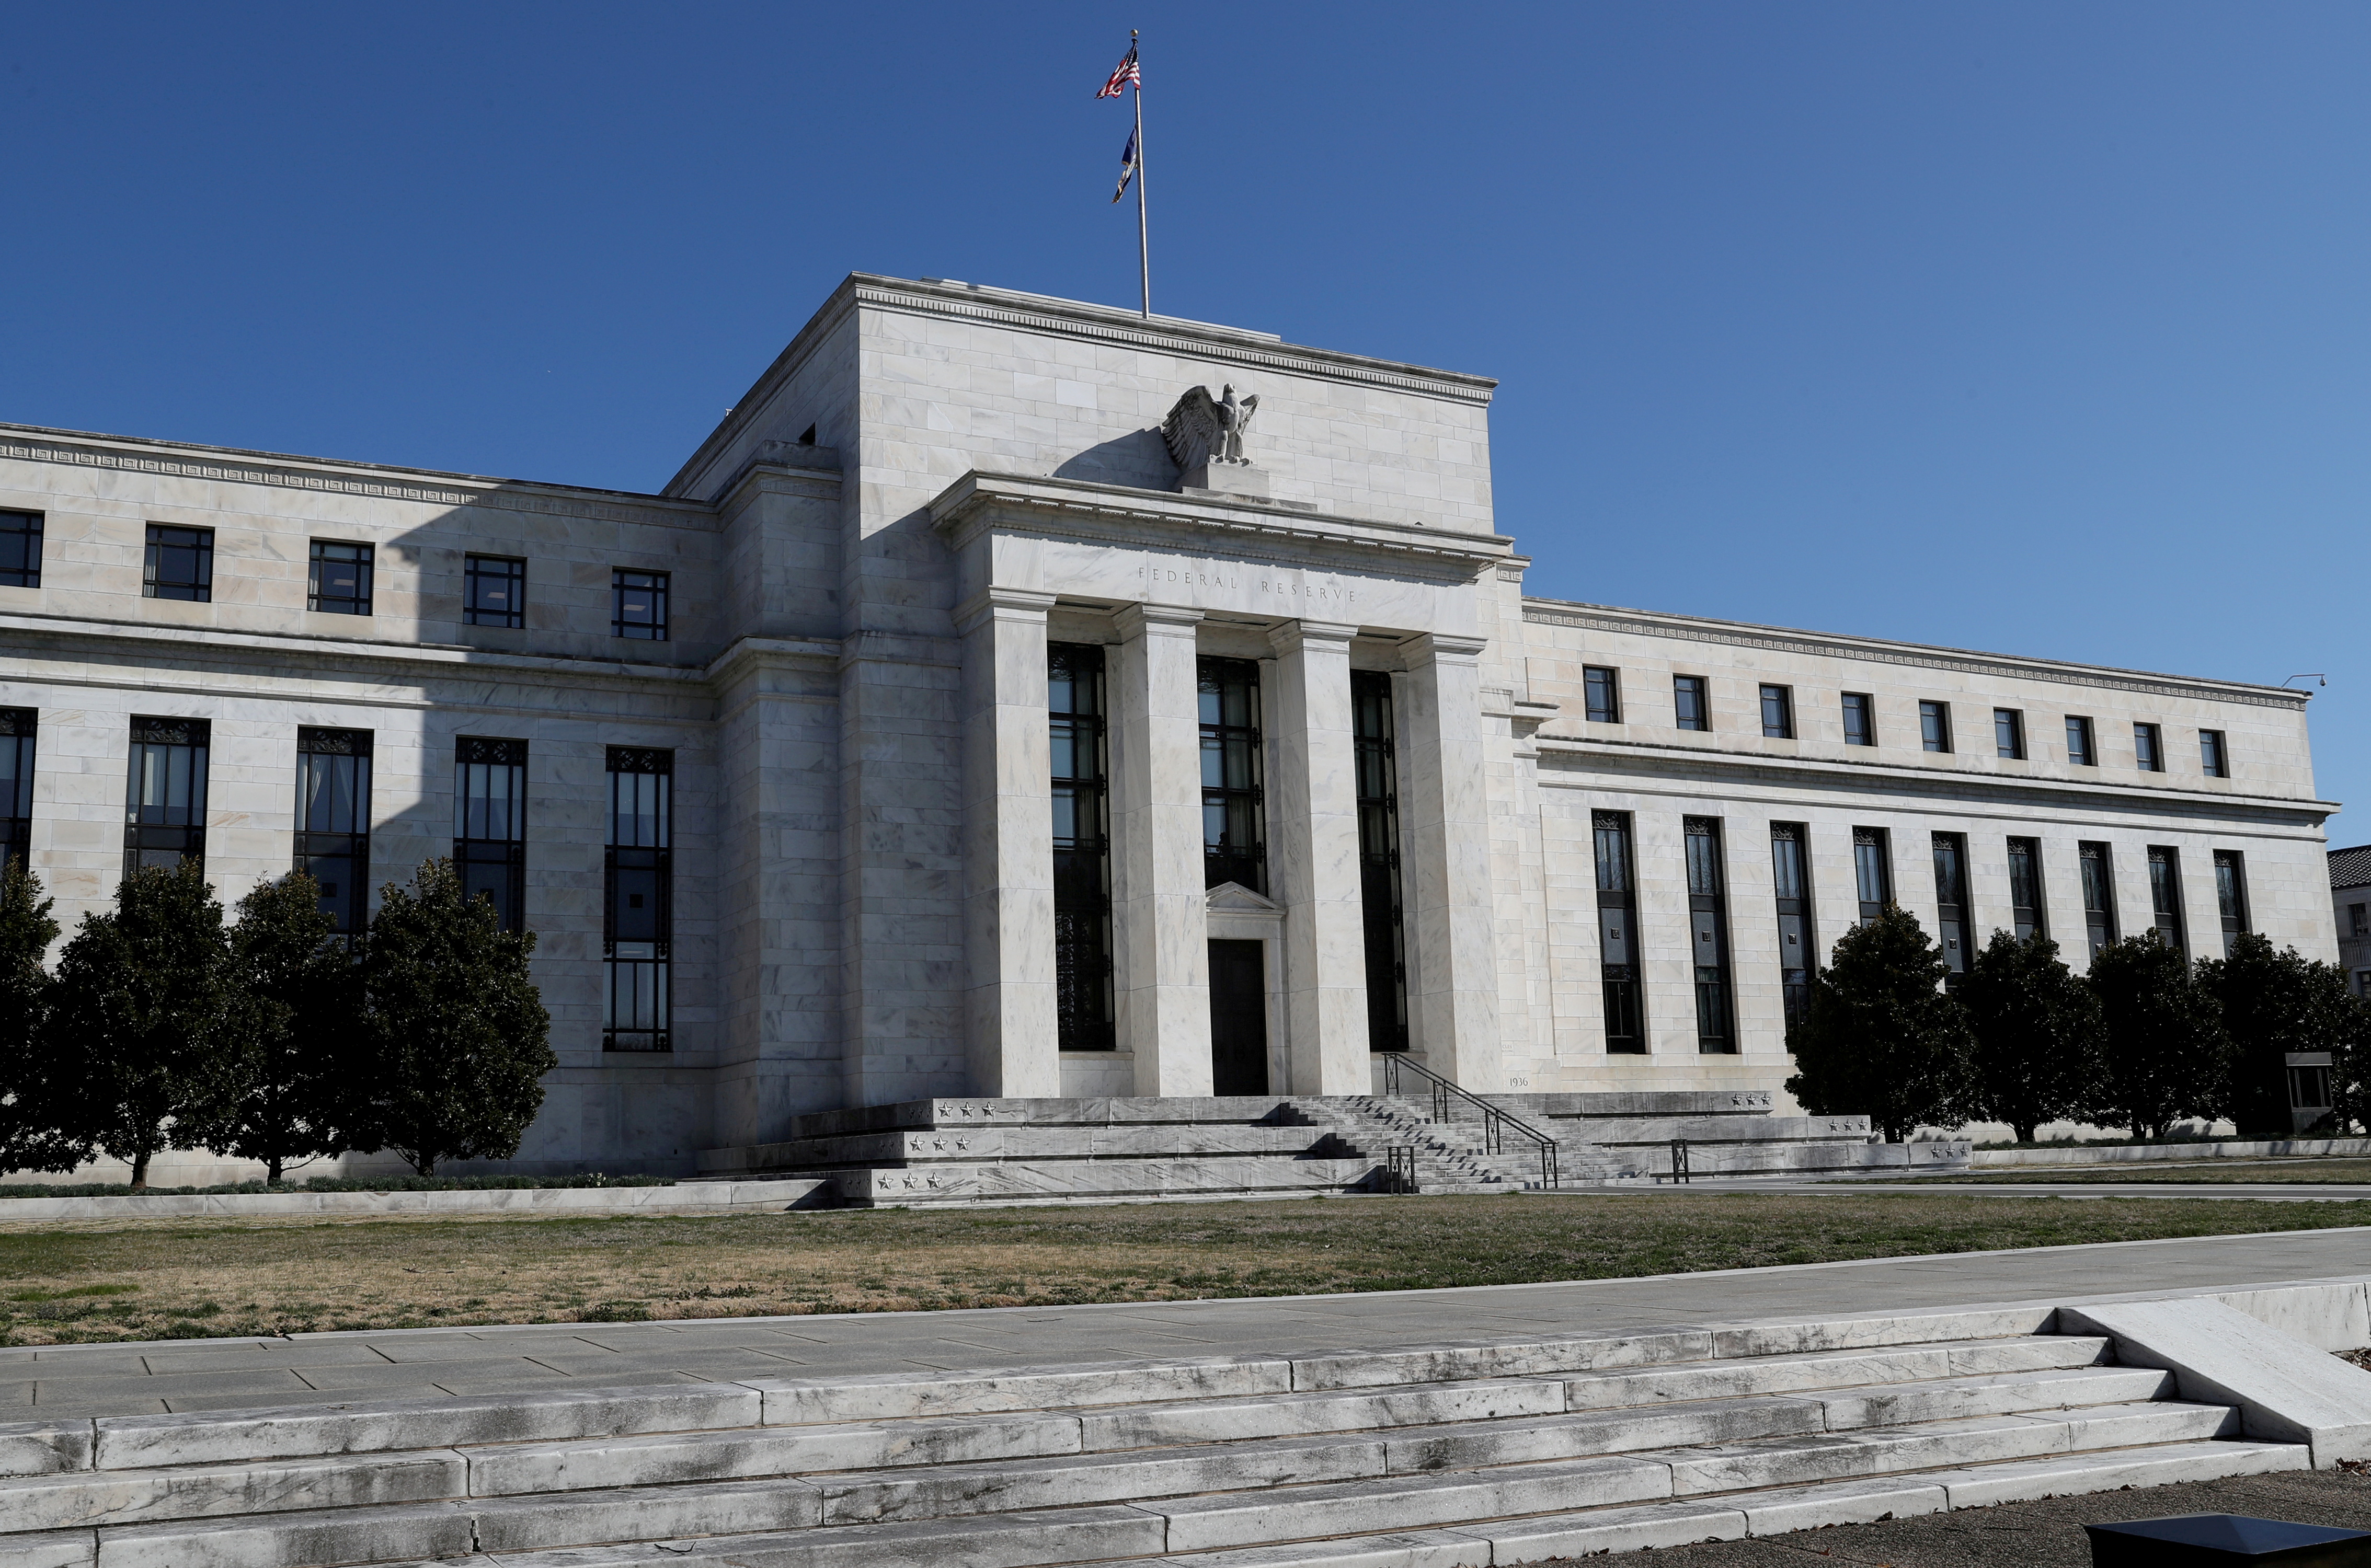 Federal Reserve Board building on Constitution Avenue is pictured in Washington, U.S., March 19, 2019. REUTERS/Leah Millis/File Photo